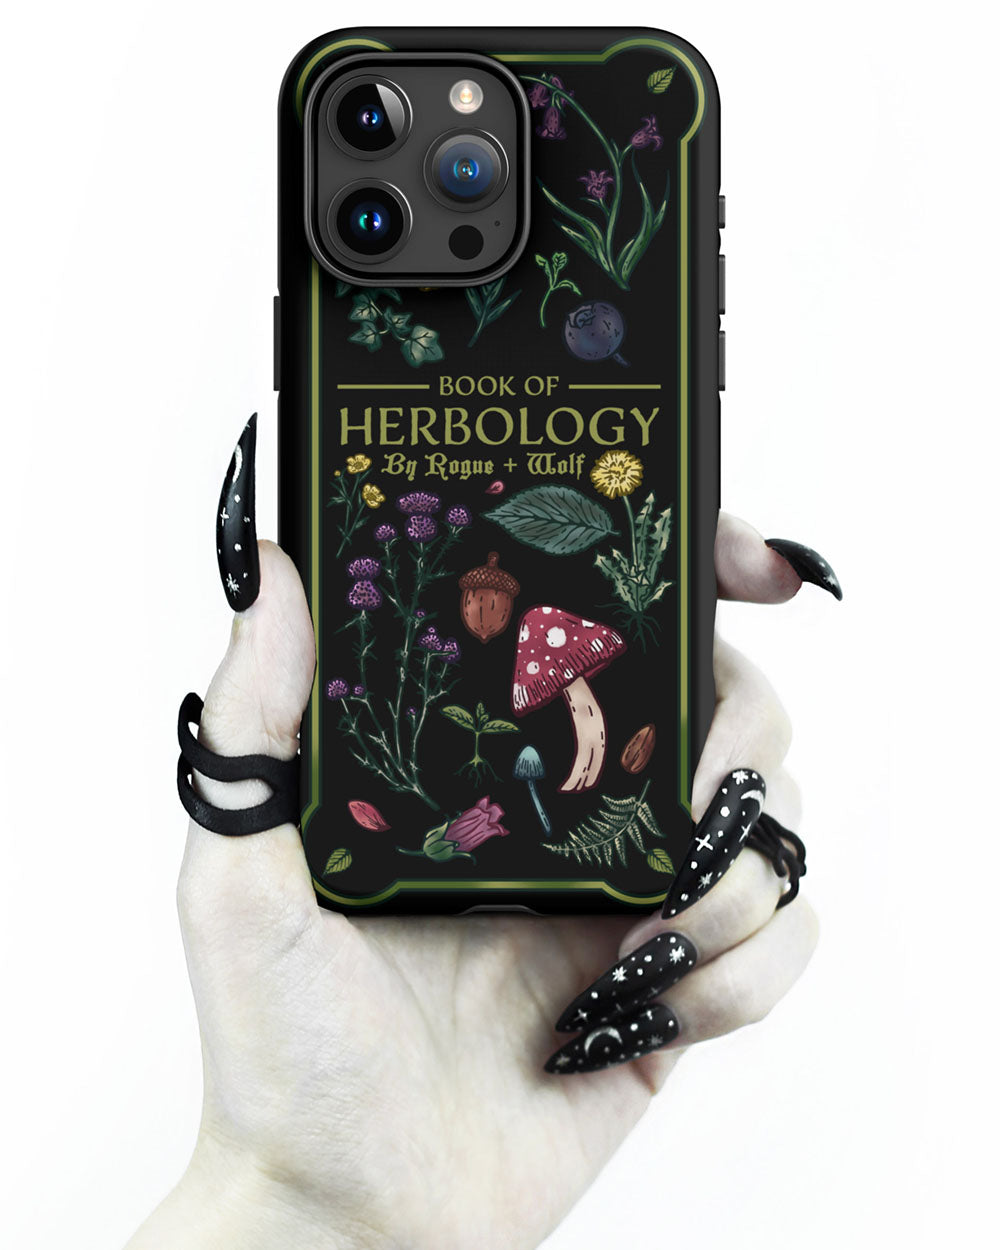 Book of Herbology Tough Phone Case for iPhone - Shockproof Witchy Phone Accessories Anti-scratch Goth Cover